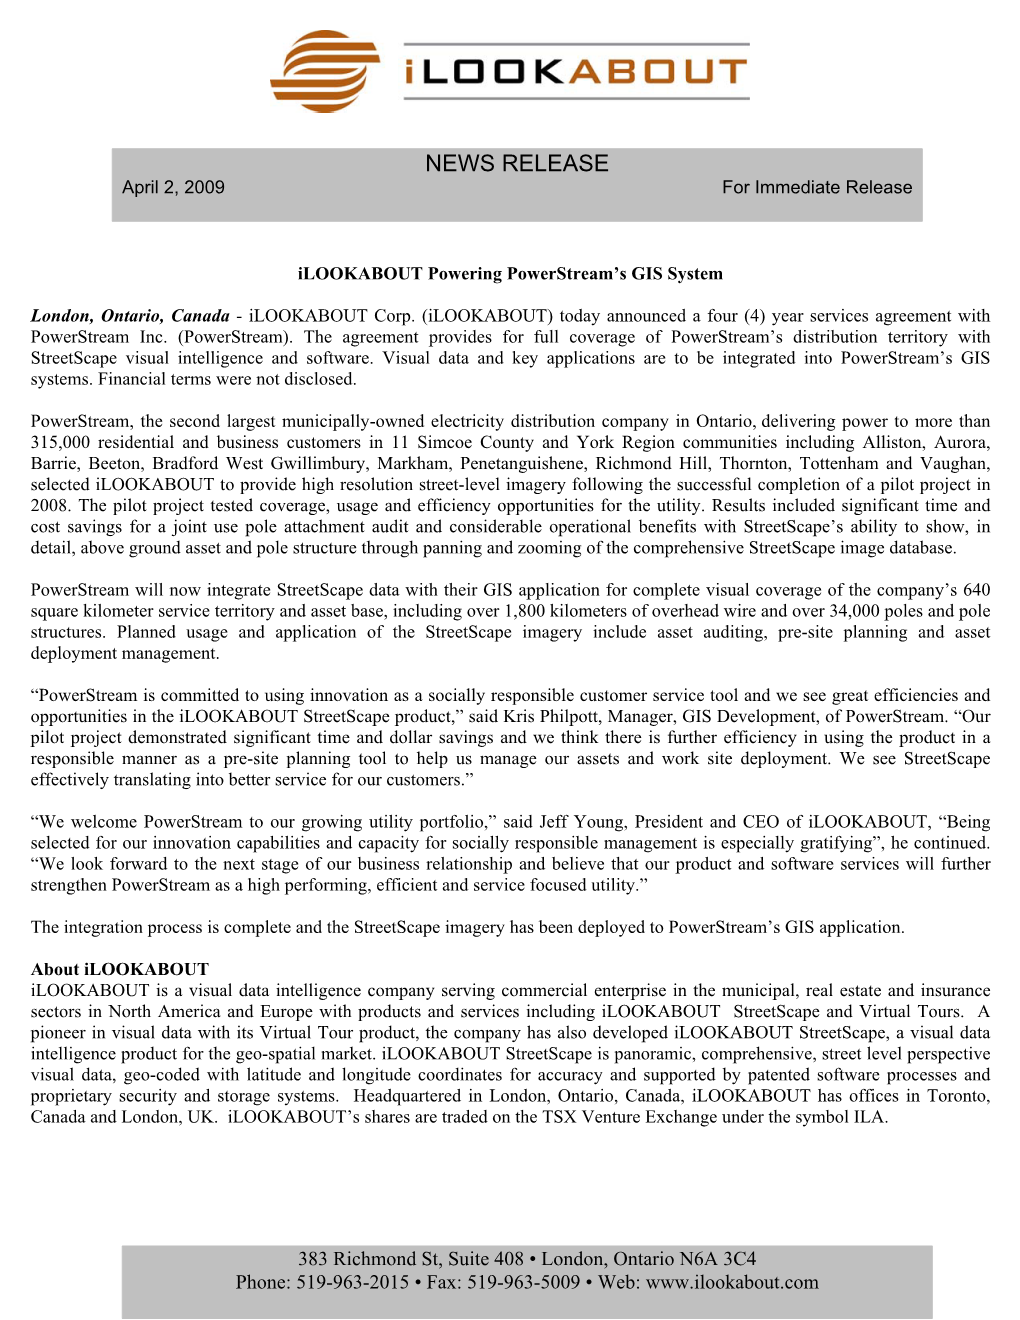 NEWS RELEASE April 2, 2009 for Immediate Release